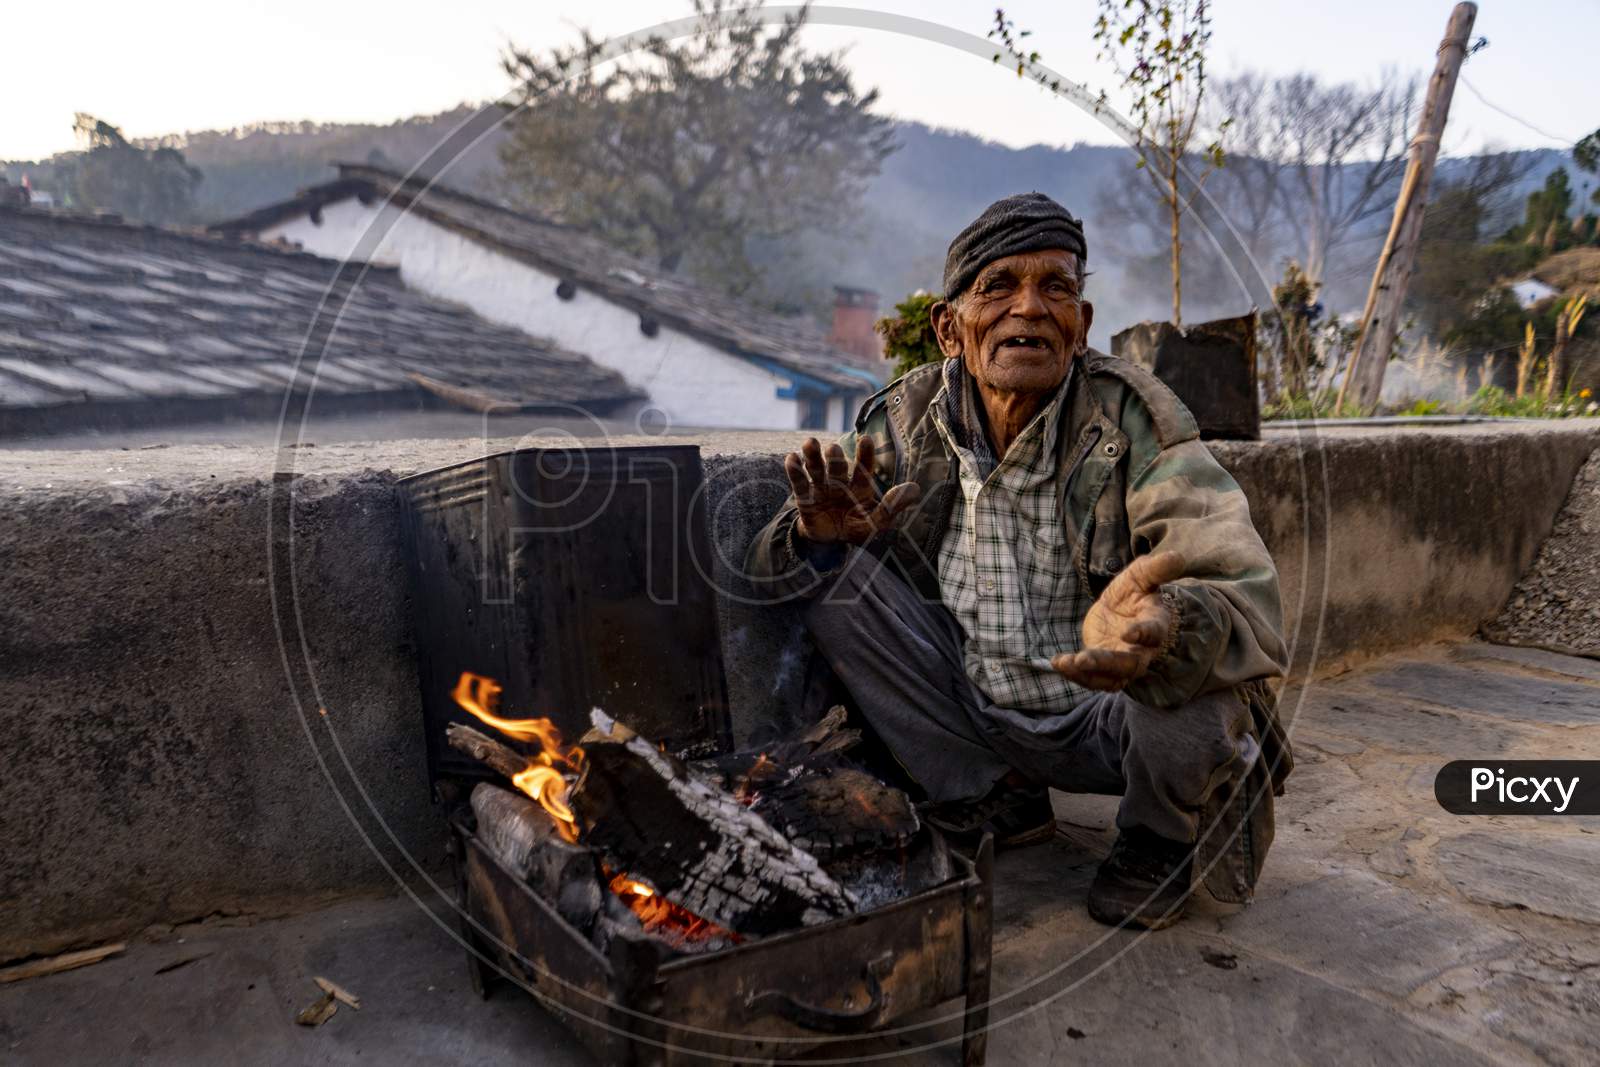 Almora, Uttarakhand - Jaunary 2 2022- An Old Man Sitting In Rugged Clothes, Soaking Warmth From Firewood. An Village Old Man Smiling Into The Camera.